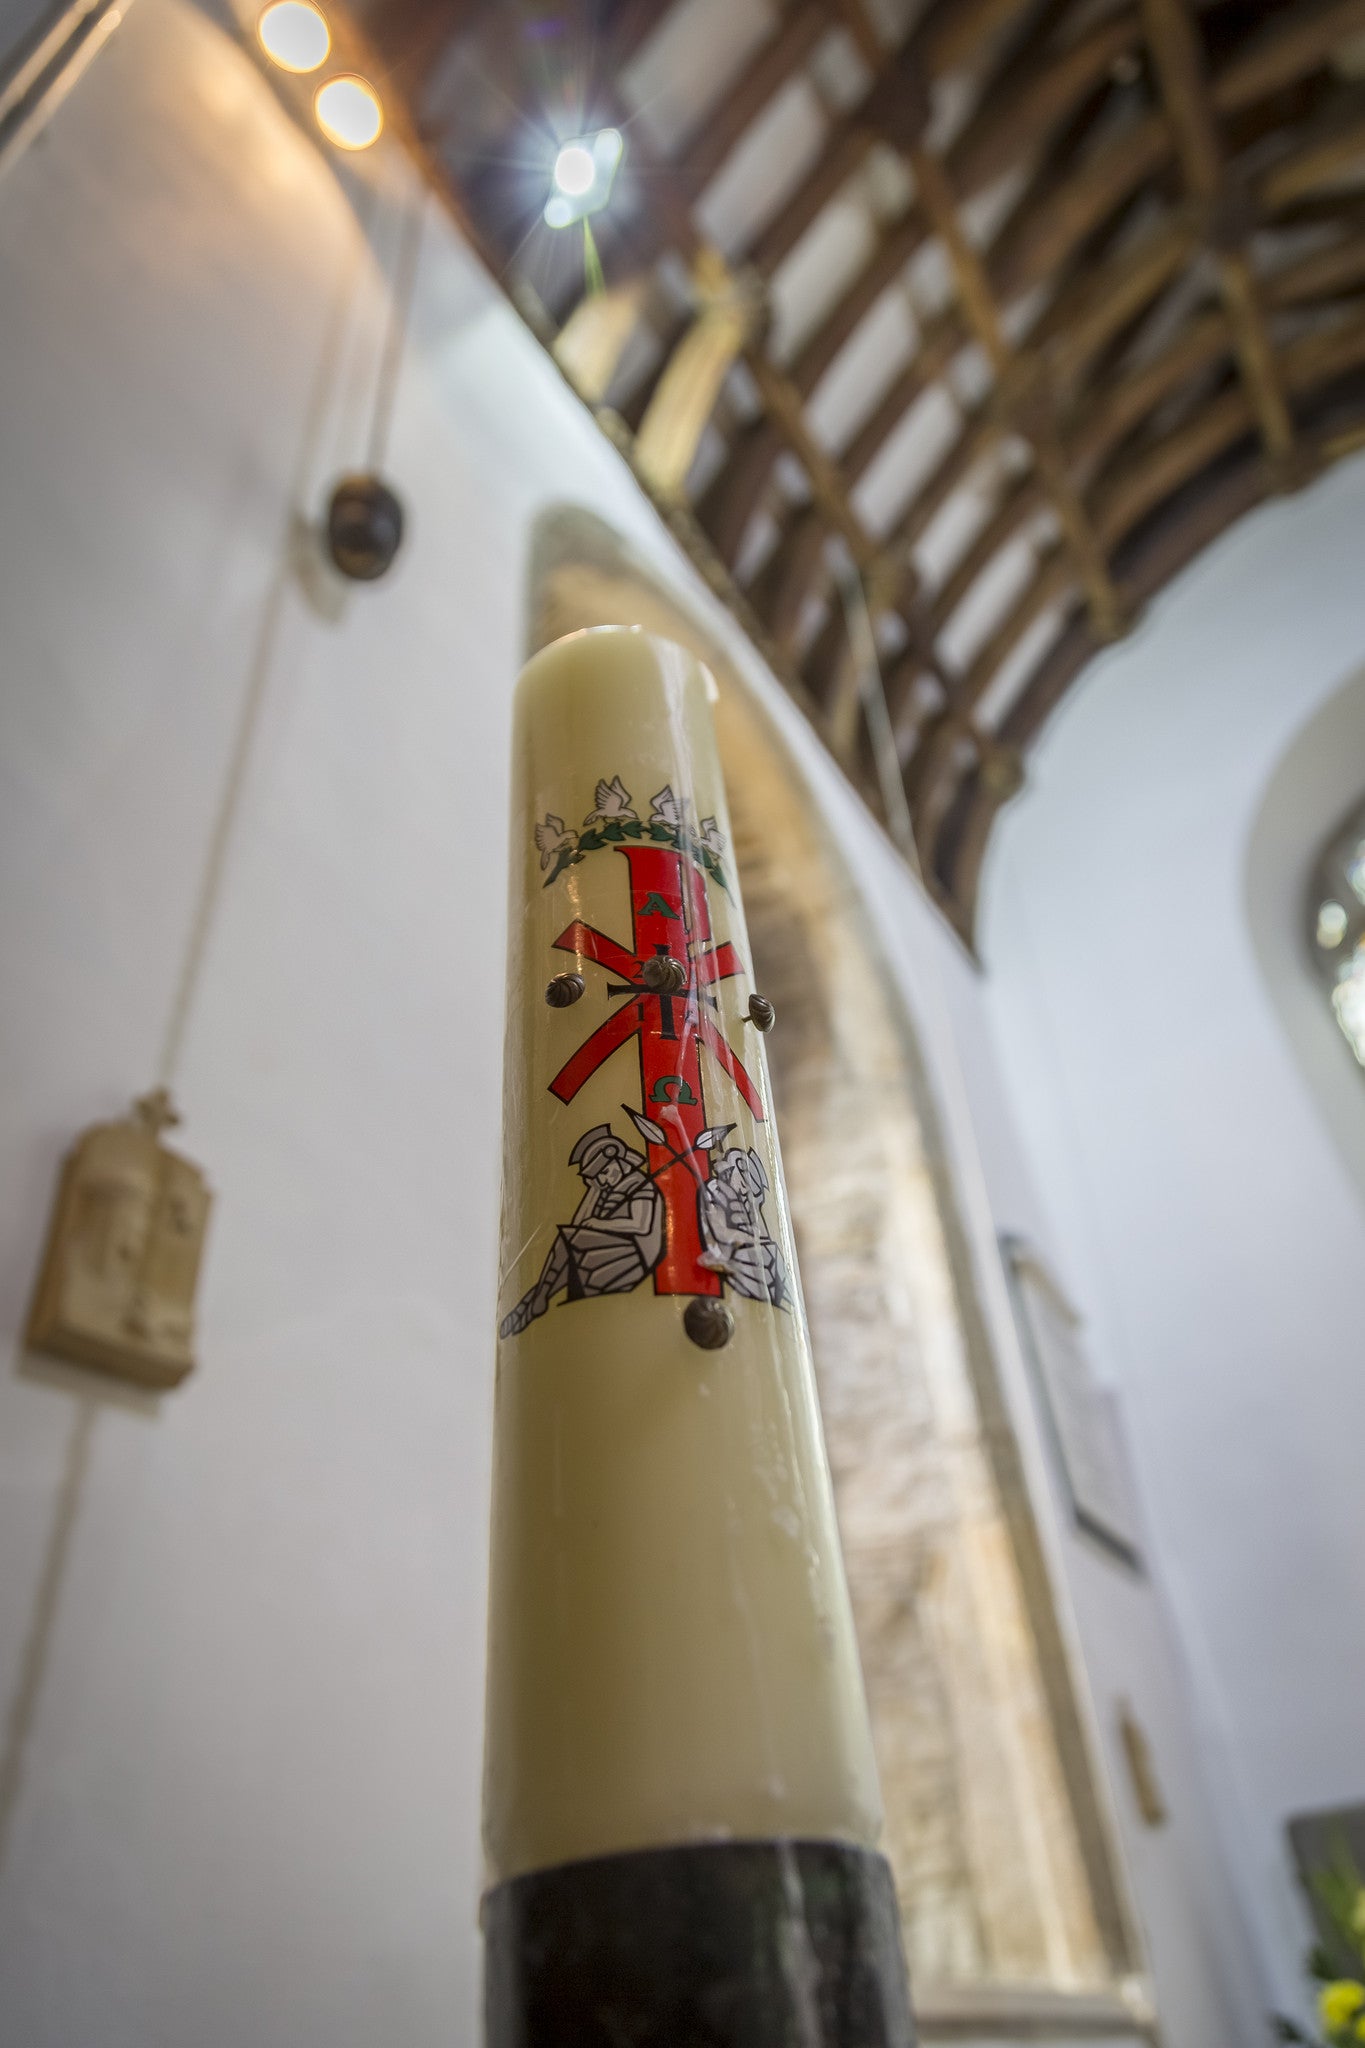 2" 3/4" Paschal Candle